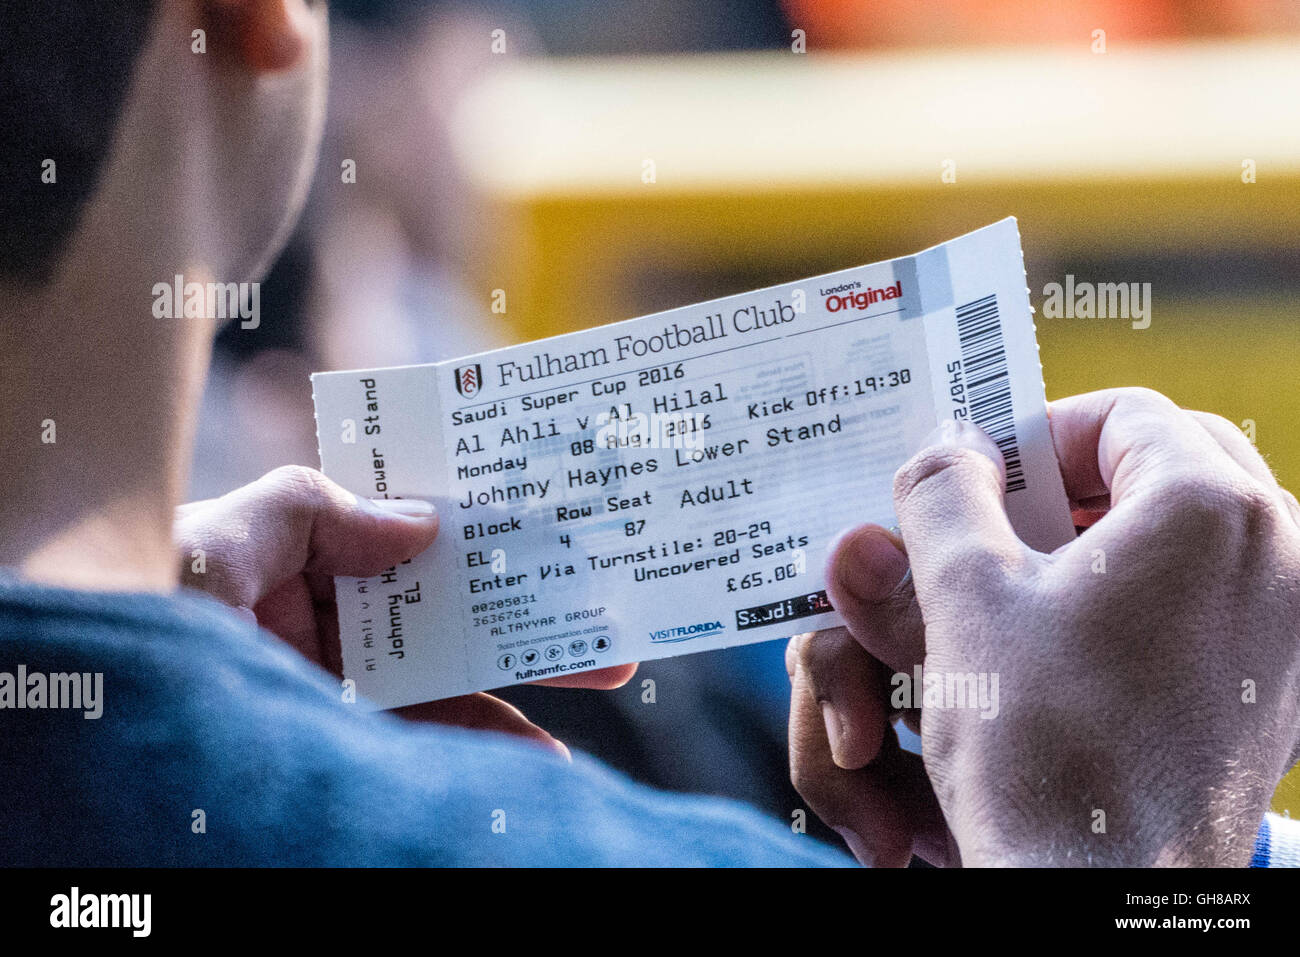 London, UK. 8th August, 2016. Football ticket. Saudis and other middle-eastern fans watch teams Al-Ahli vs Al-Hilal during the Saudi Super Cup match finals at Craven Cottage, Fulham Football Club Credit:  Guy Corbishley/Alamy Live News Stock Photo